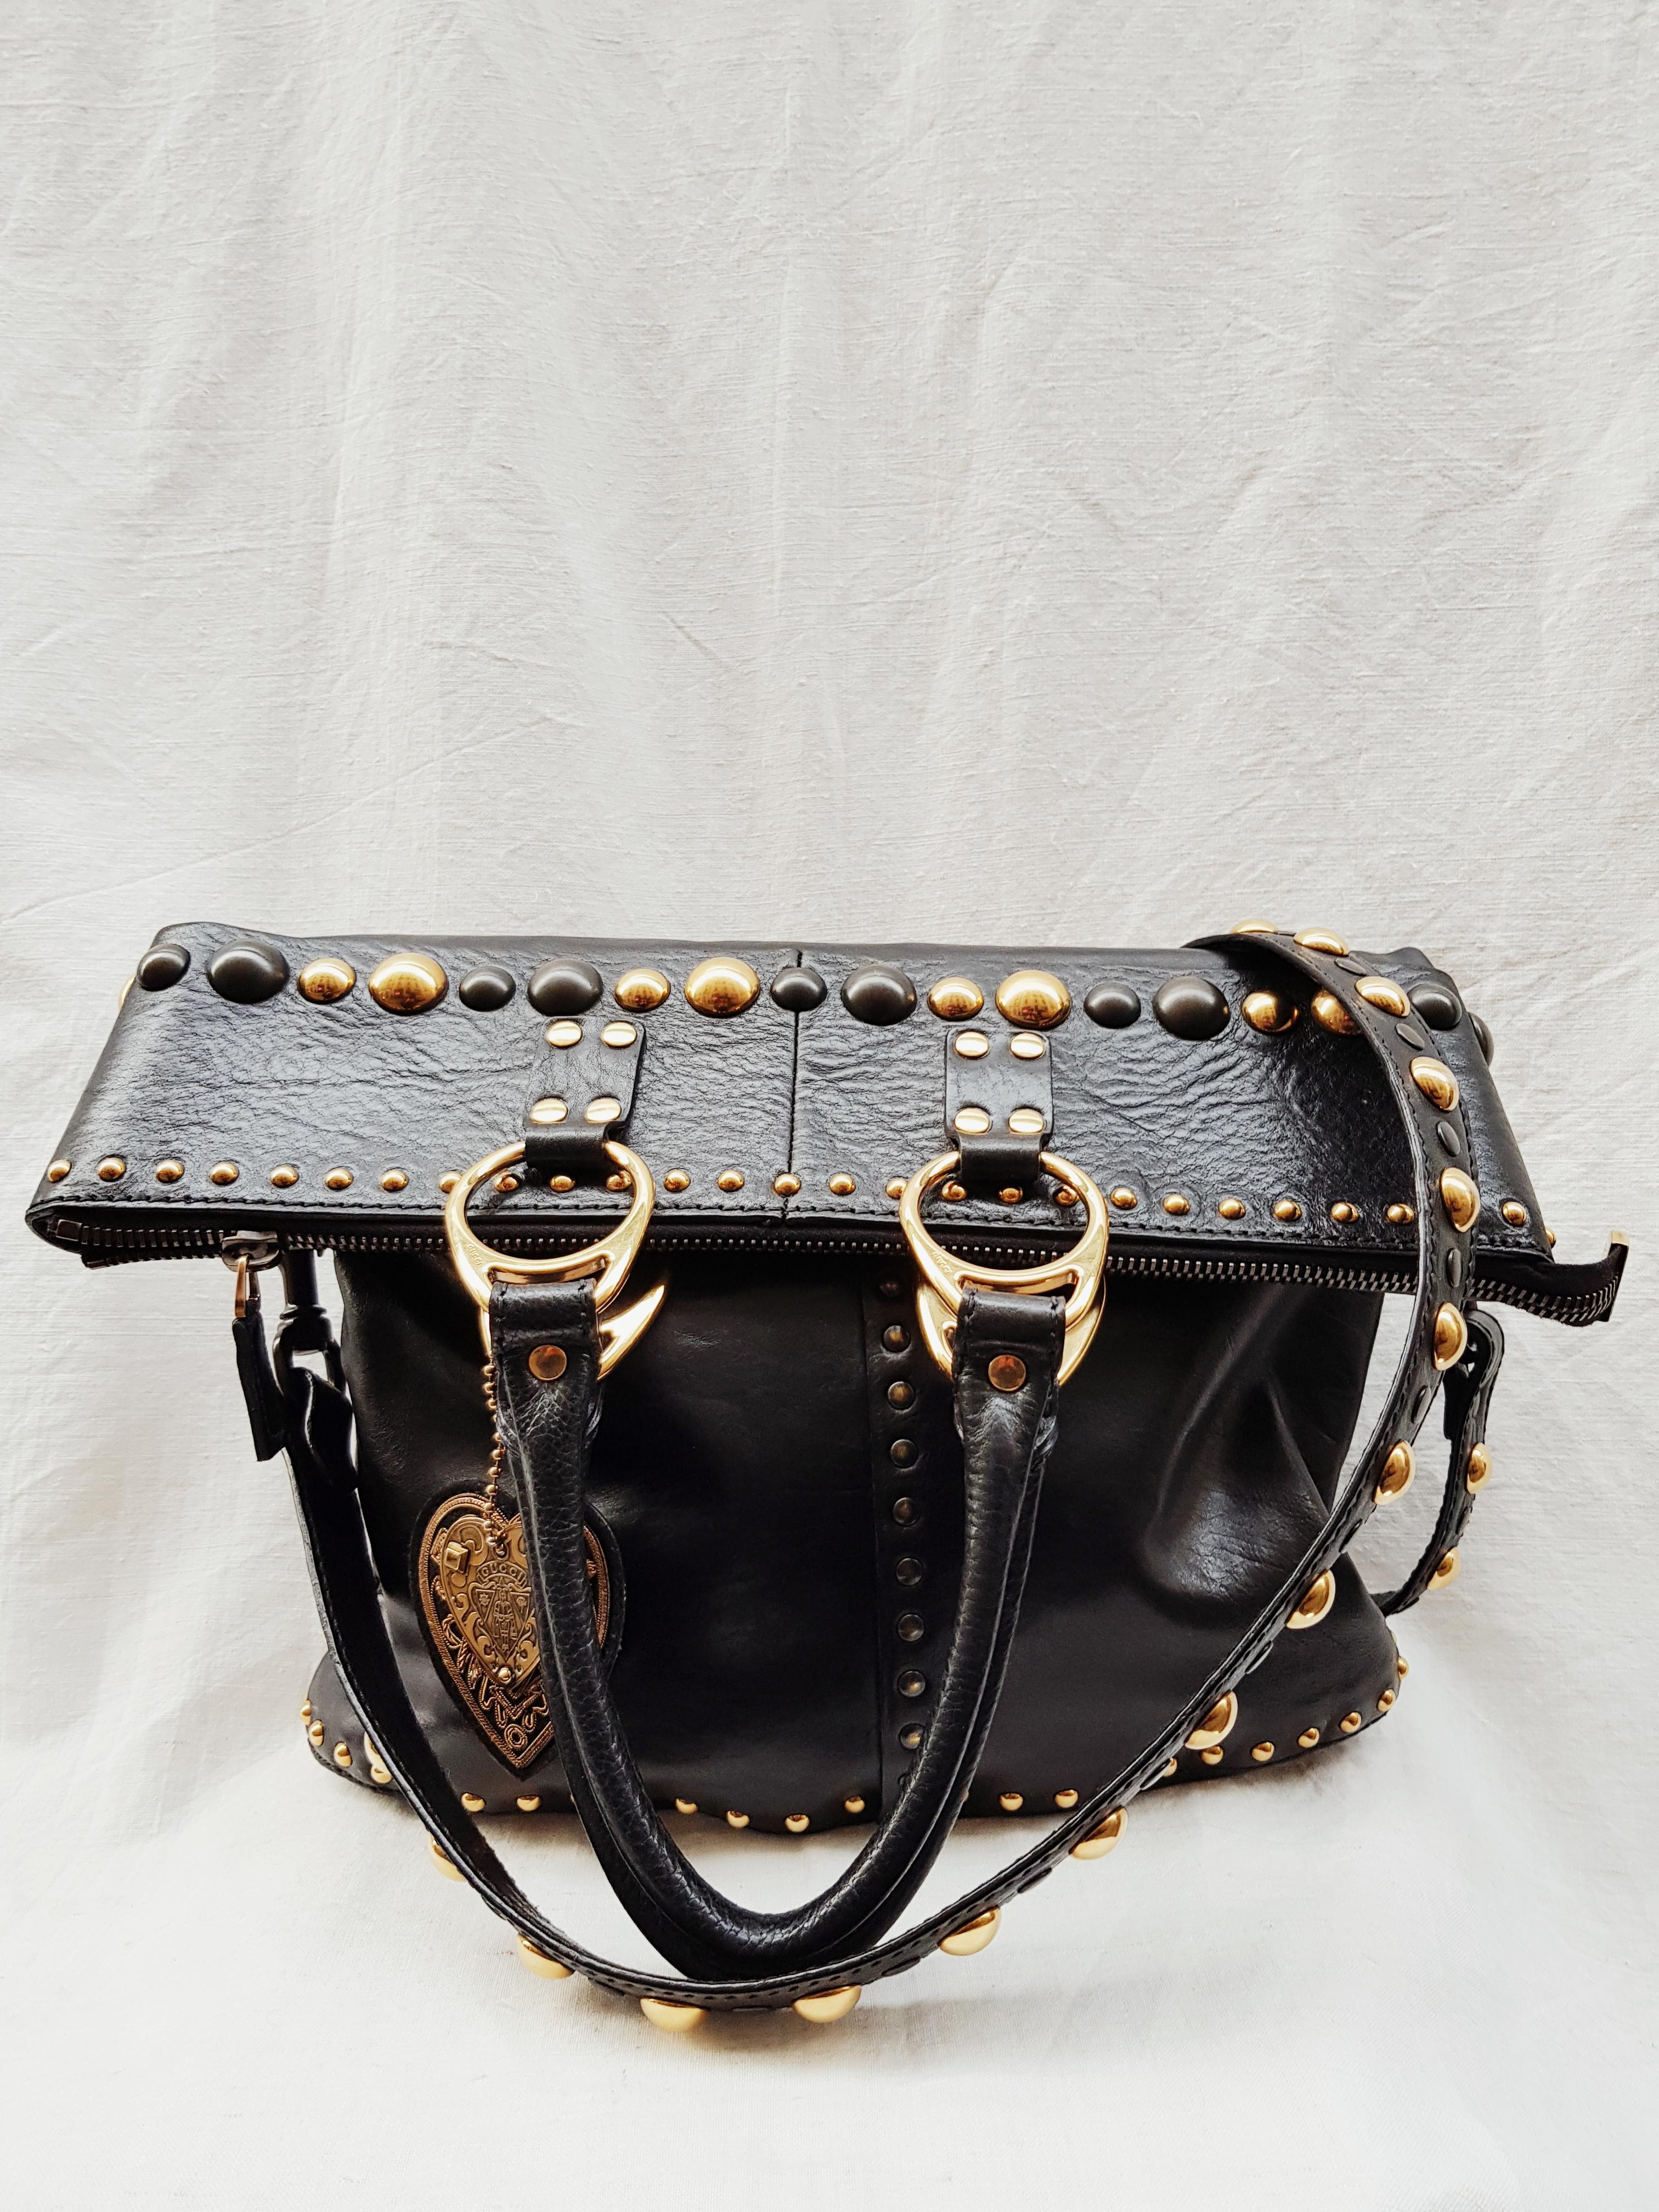 Everything can fit into this beautiful bag, great as a tote, and it’s long. Or as a crossbody and it’s folded over.

-Comes with a detachable and black studded leather strap
-Gucci Babouska studs in gold and bronze
-Bronze tone Gucci engraved